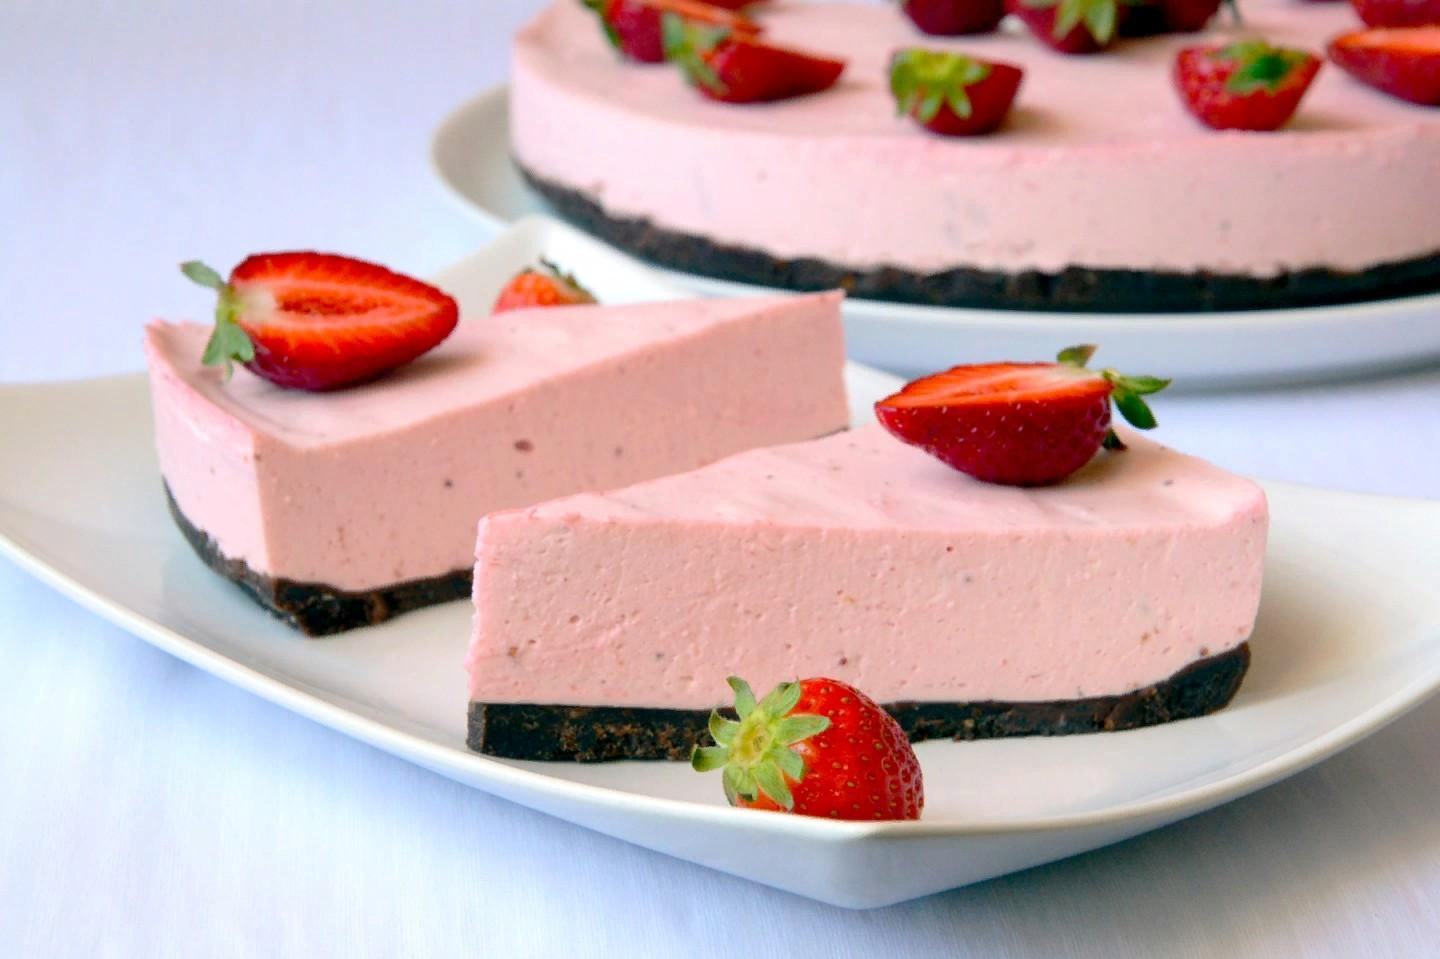 Strawberry cheesecake without baking